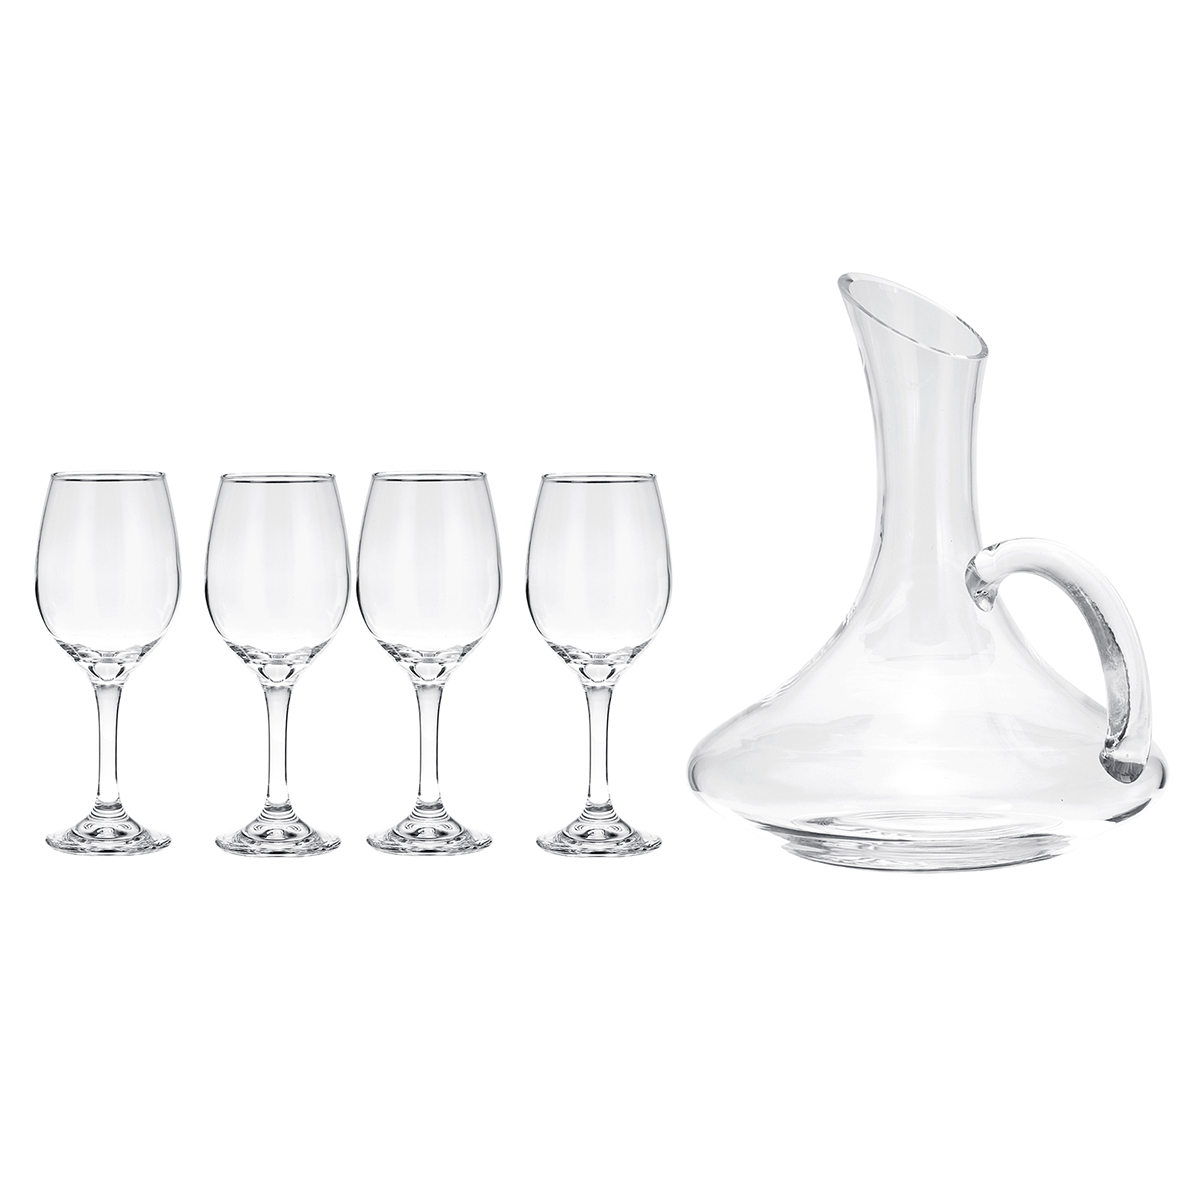 1700ML-Crystal-Glass-Decanter-and-4-Cups-Elegant-Pourer-Carafe-Lead-Free-Gift-Table-Aerator-Carafe-1418829-3